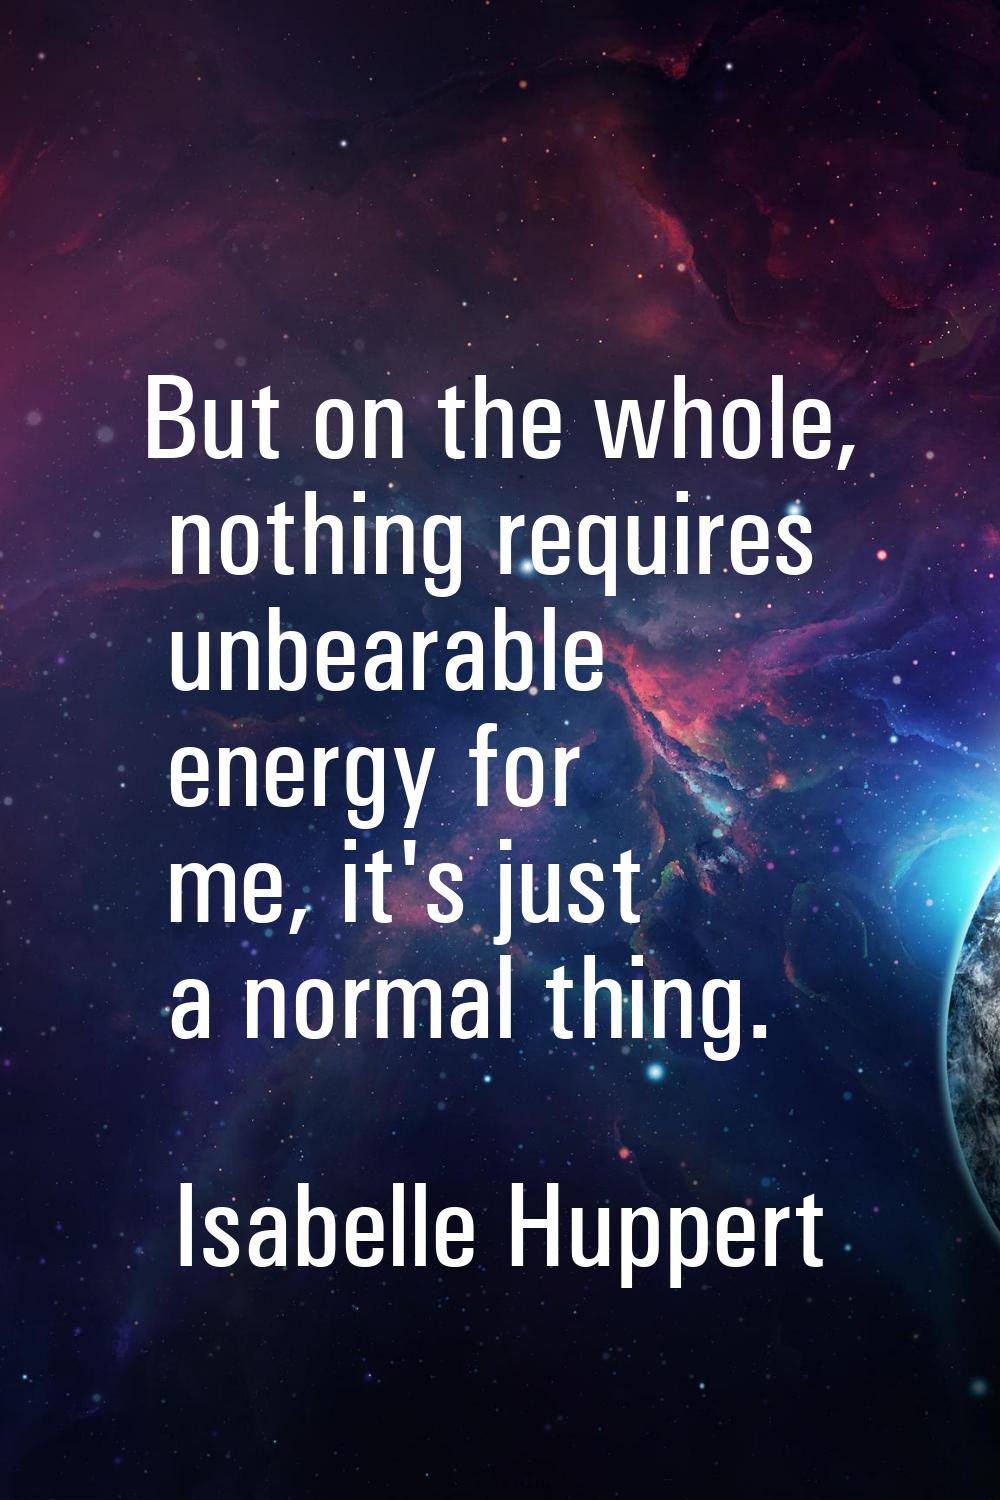 But on the whole, nothing requires unbearable energy for me, it's just a normal thing.